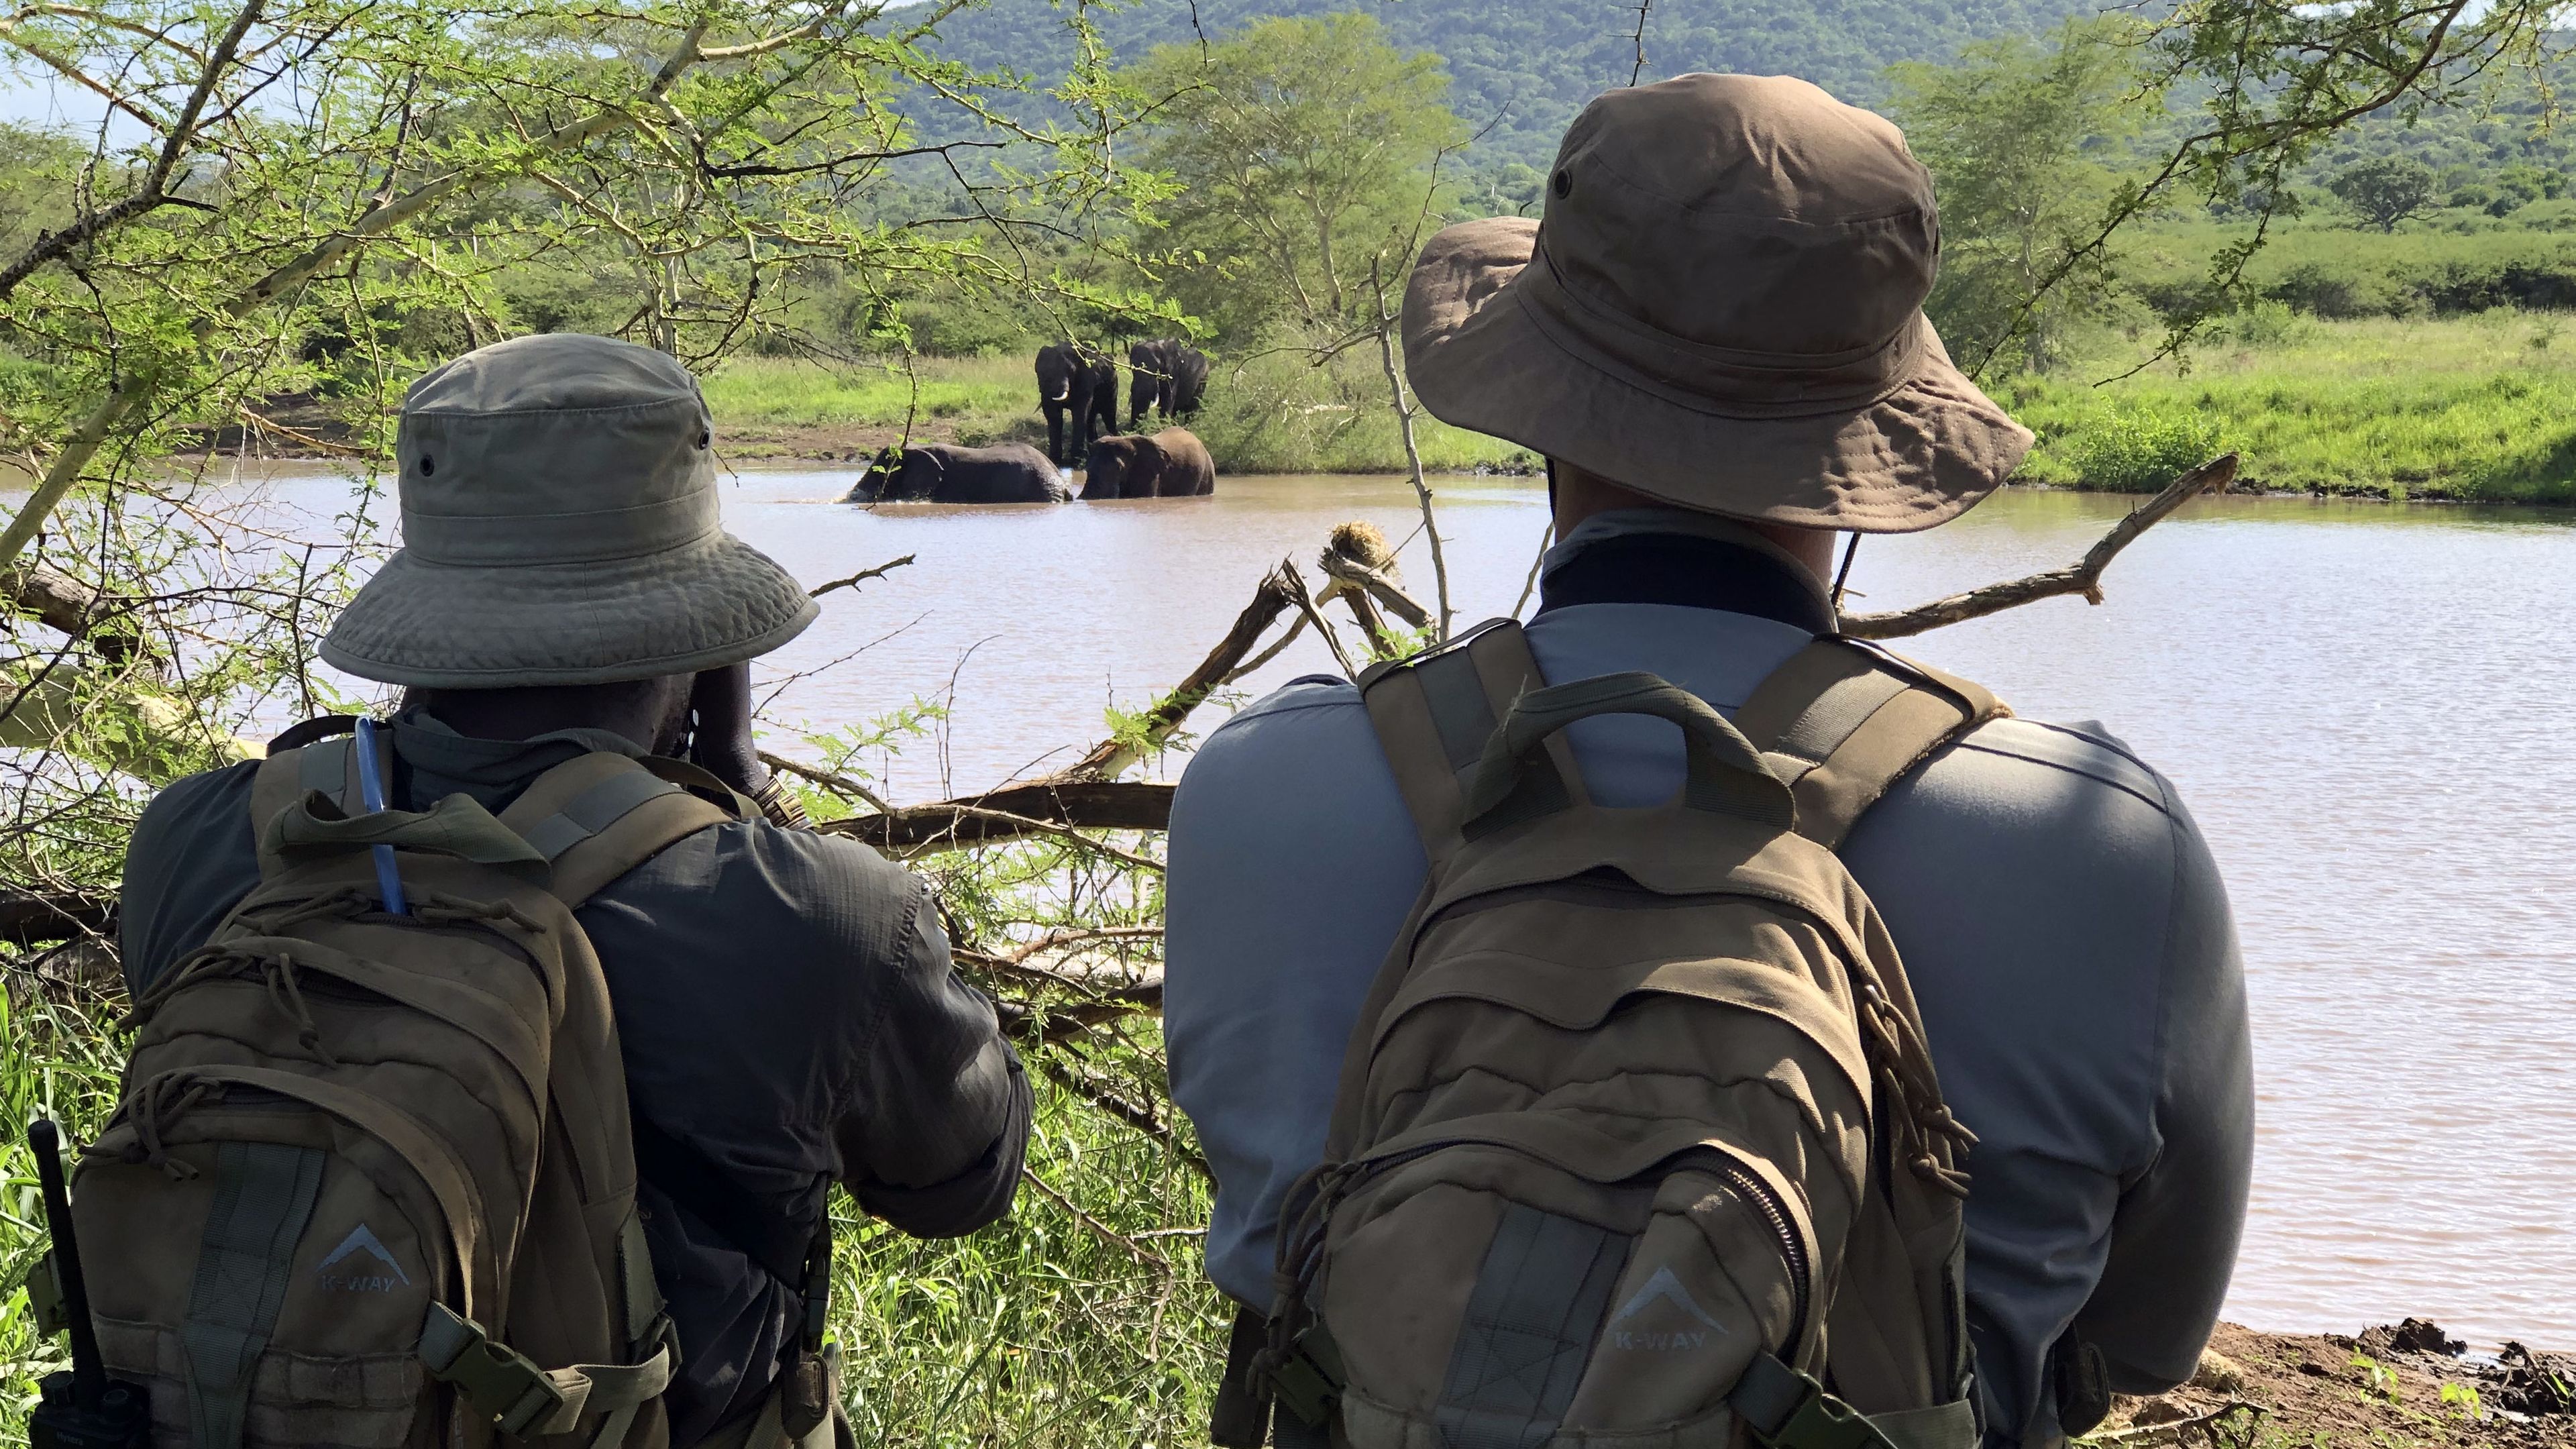 Trails Guide students on a game walk in Africa observing bathing elephants in Southern Africa